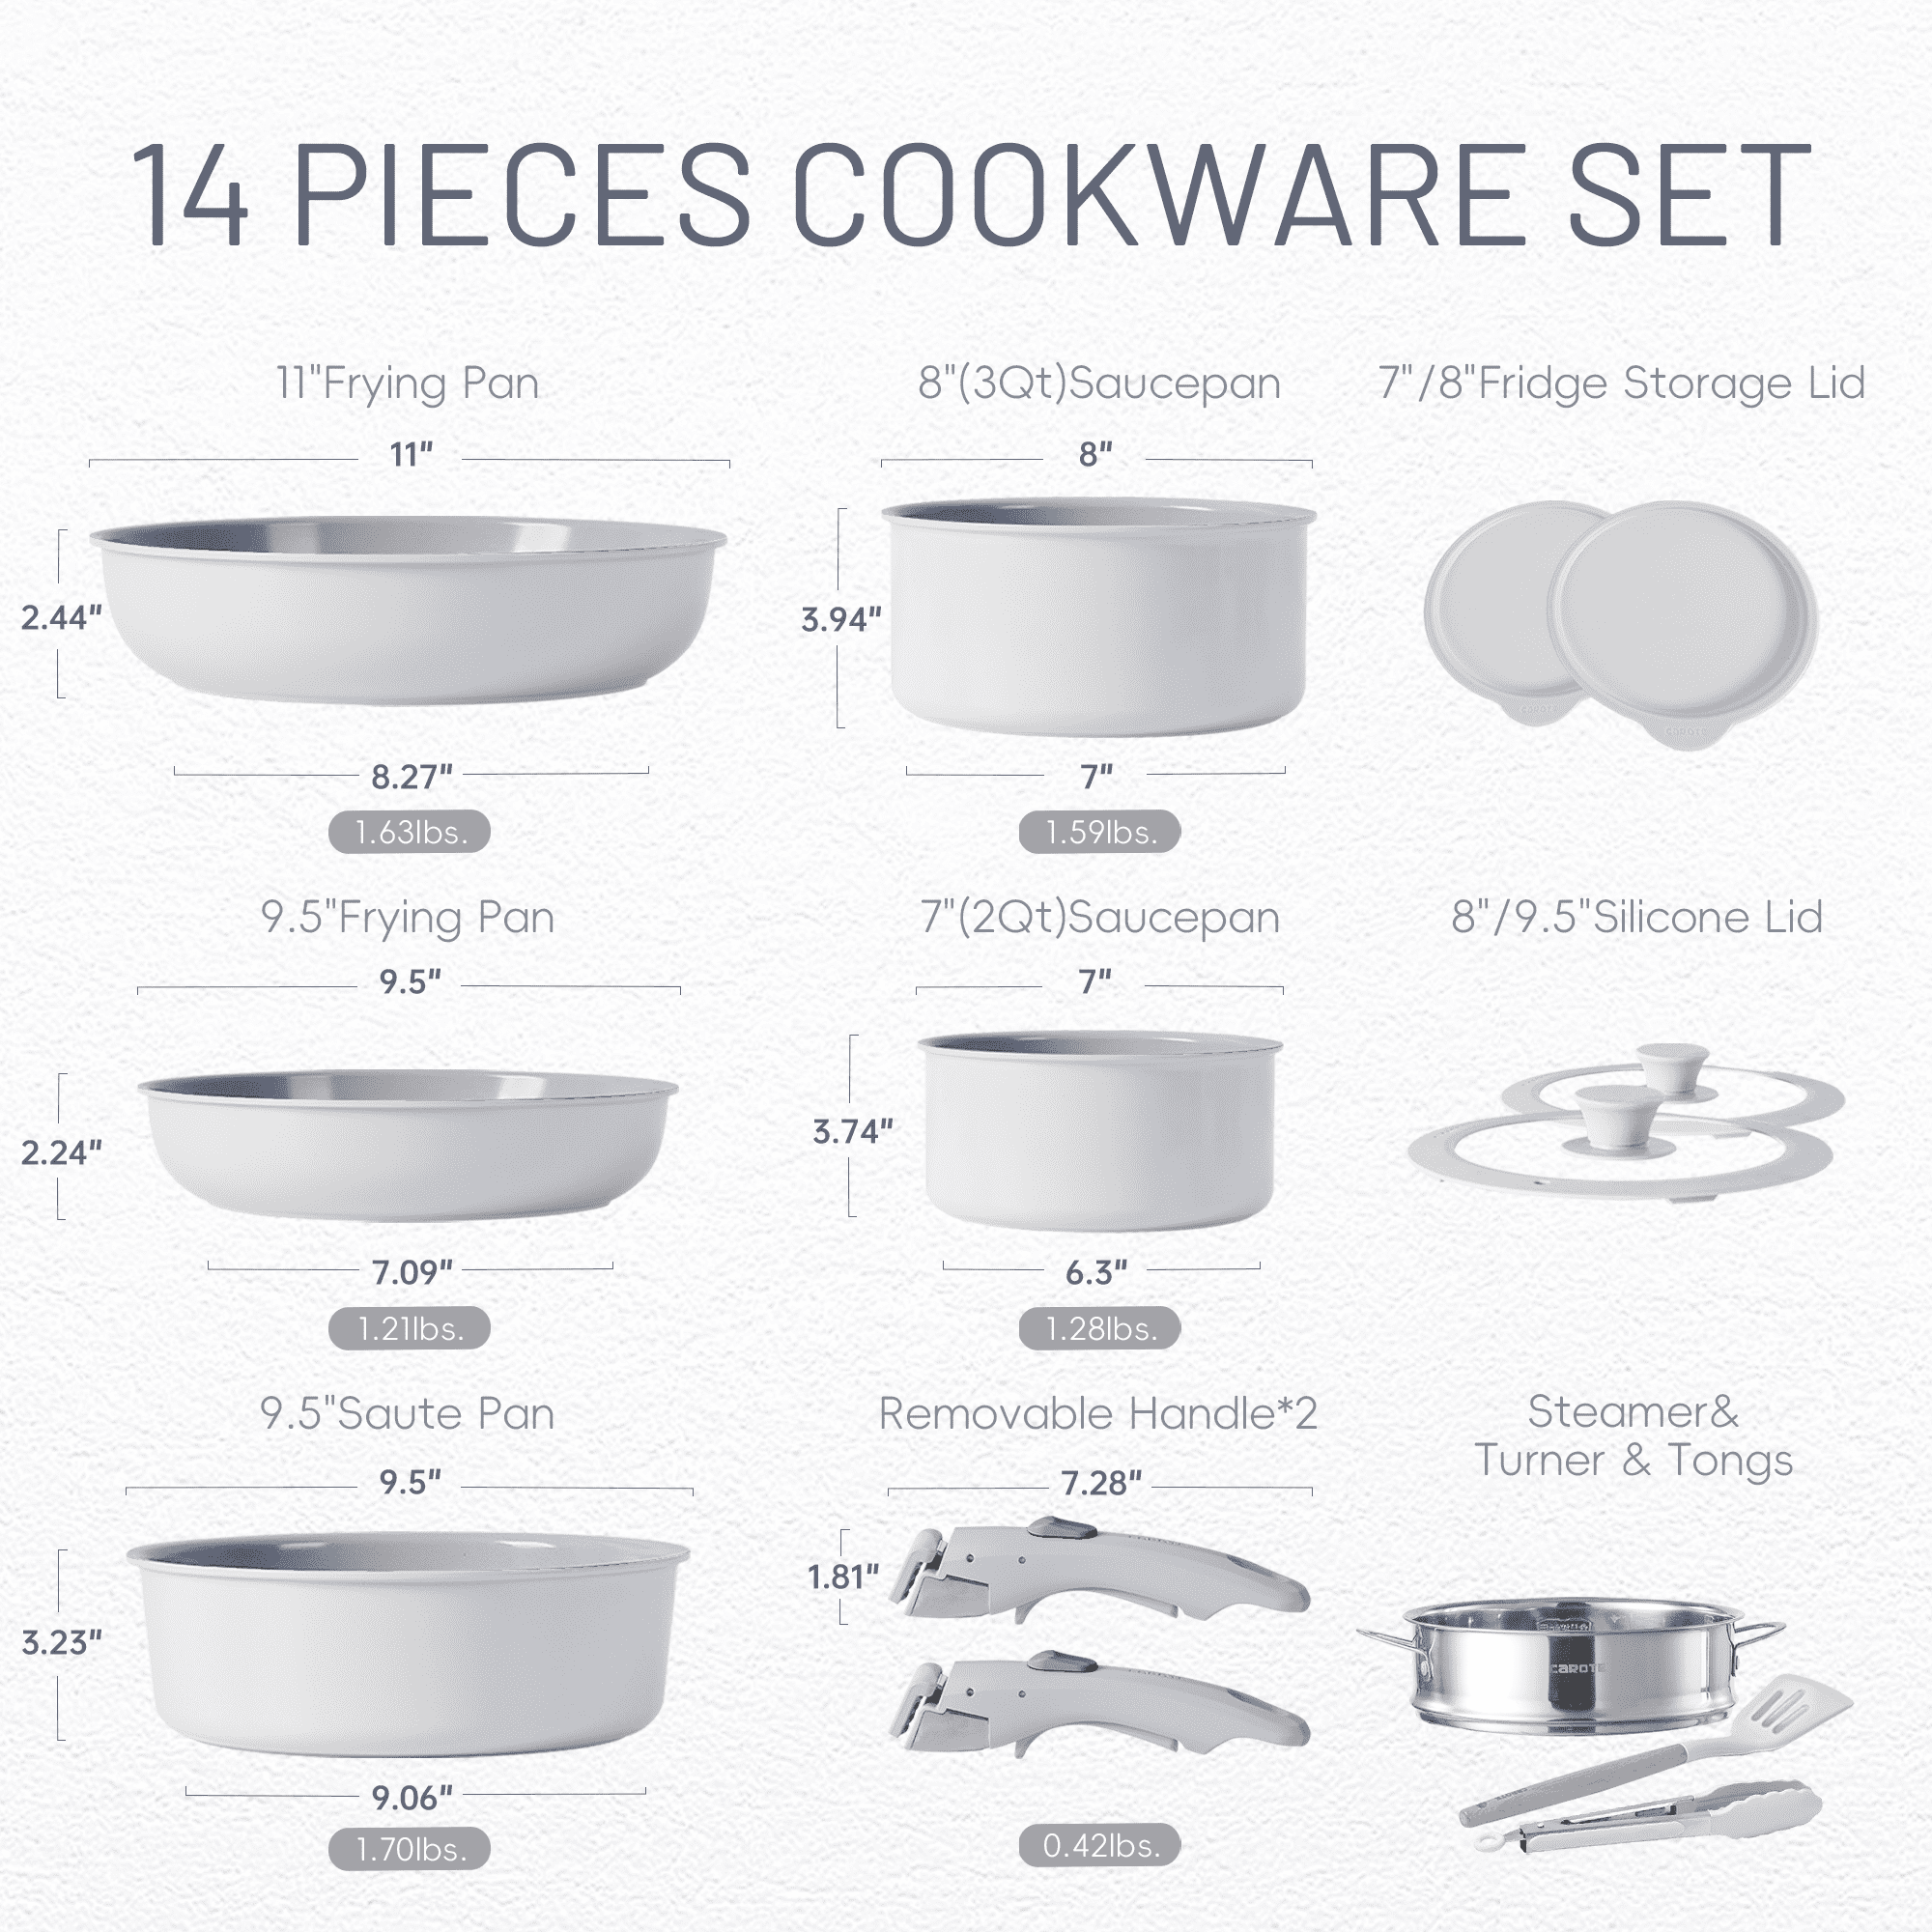 CAROTE Pots And Pans Set, Nonstick Cookware Detachable/Removable Handle,  Induction RV Kitchen Set, Oven Safe, Cream White From Huanghao620, $89.45